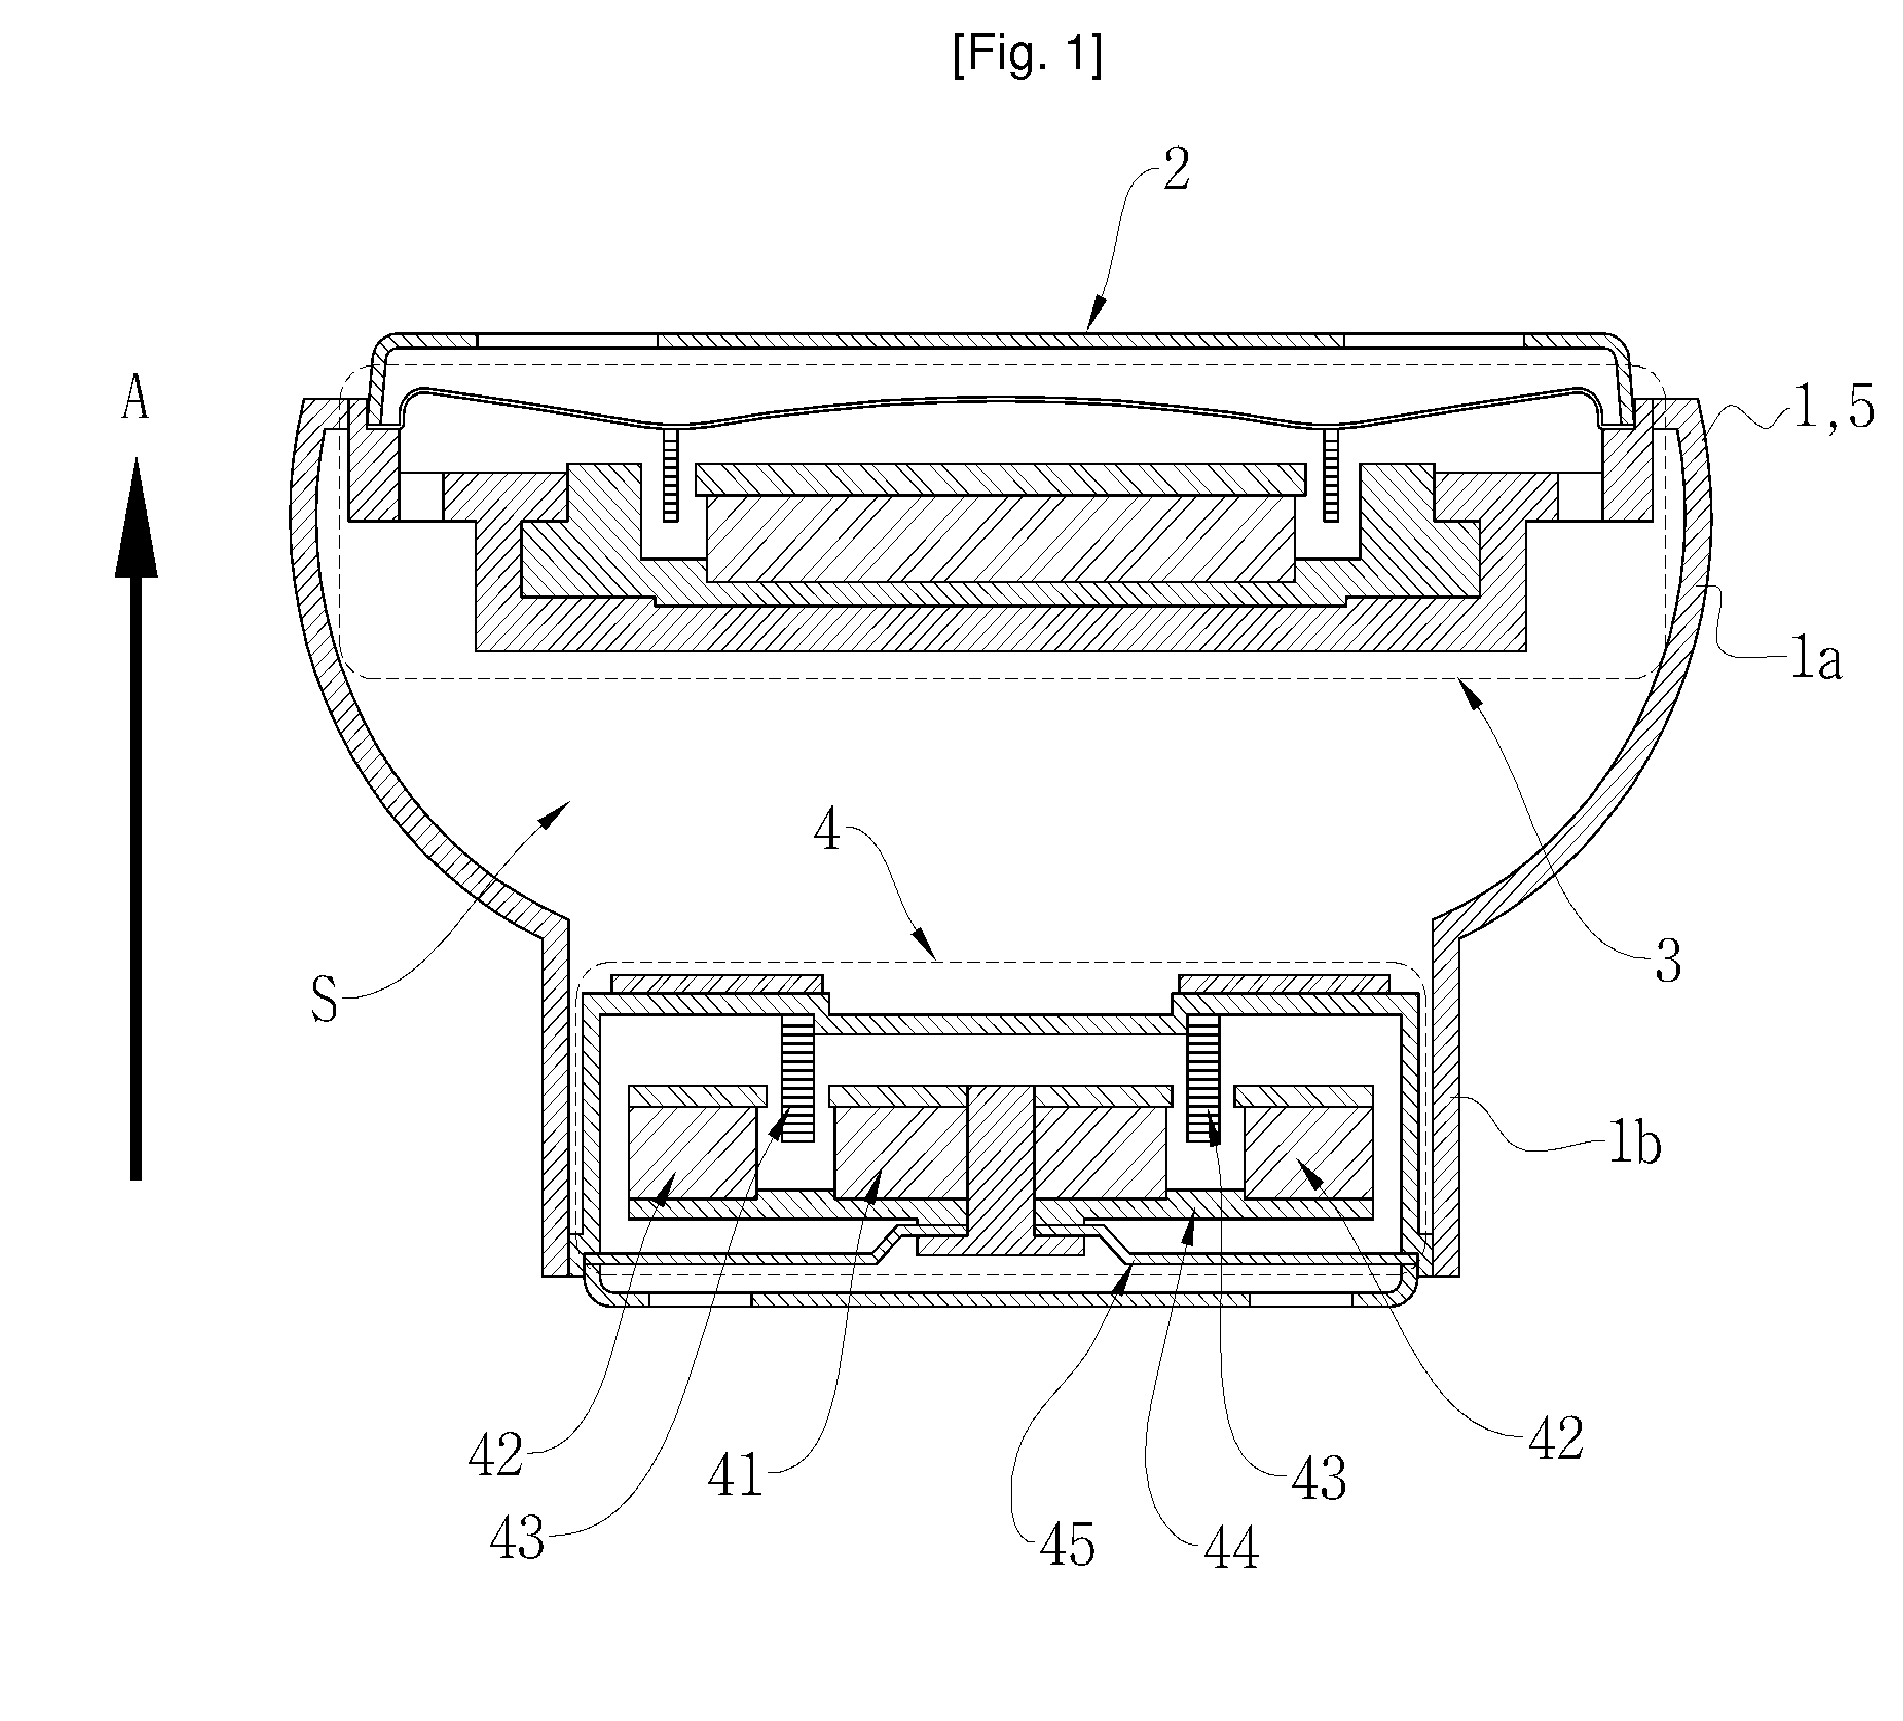 Small-sized sound receiver for producing body-sensing vibration